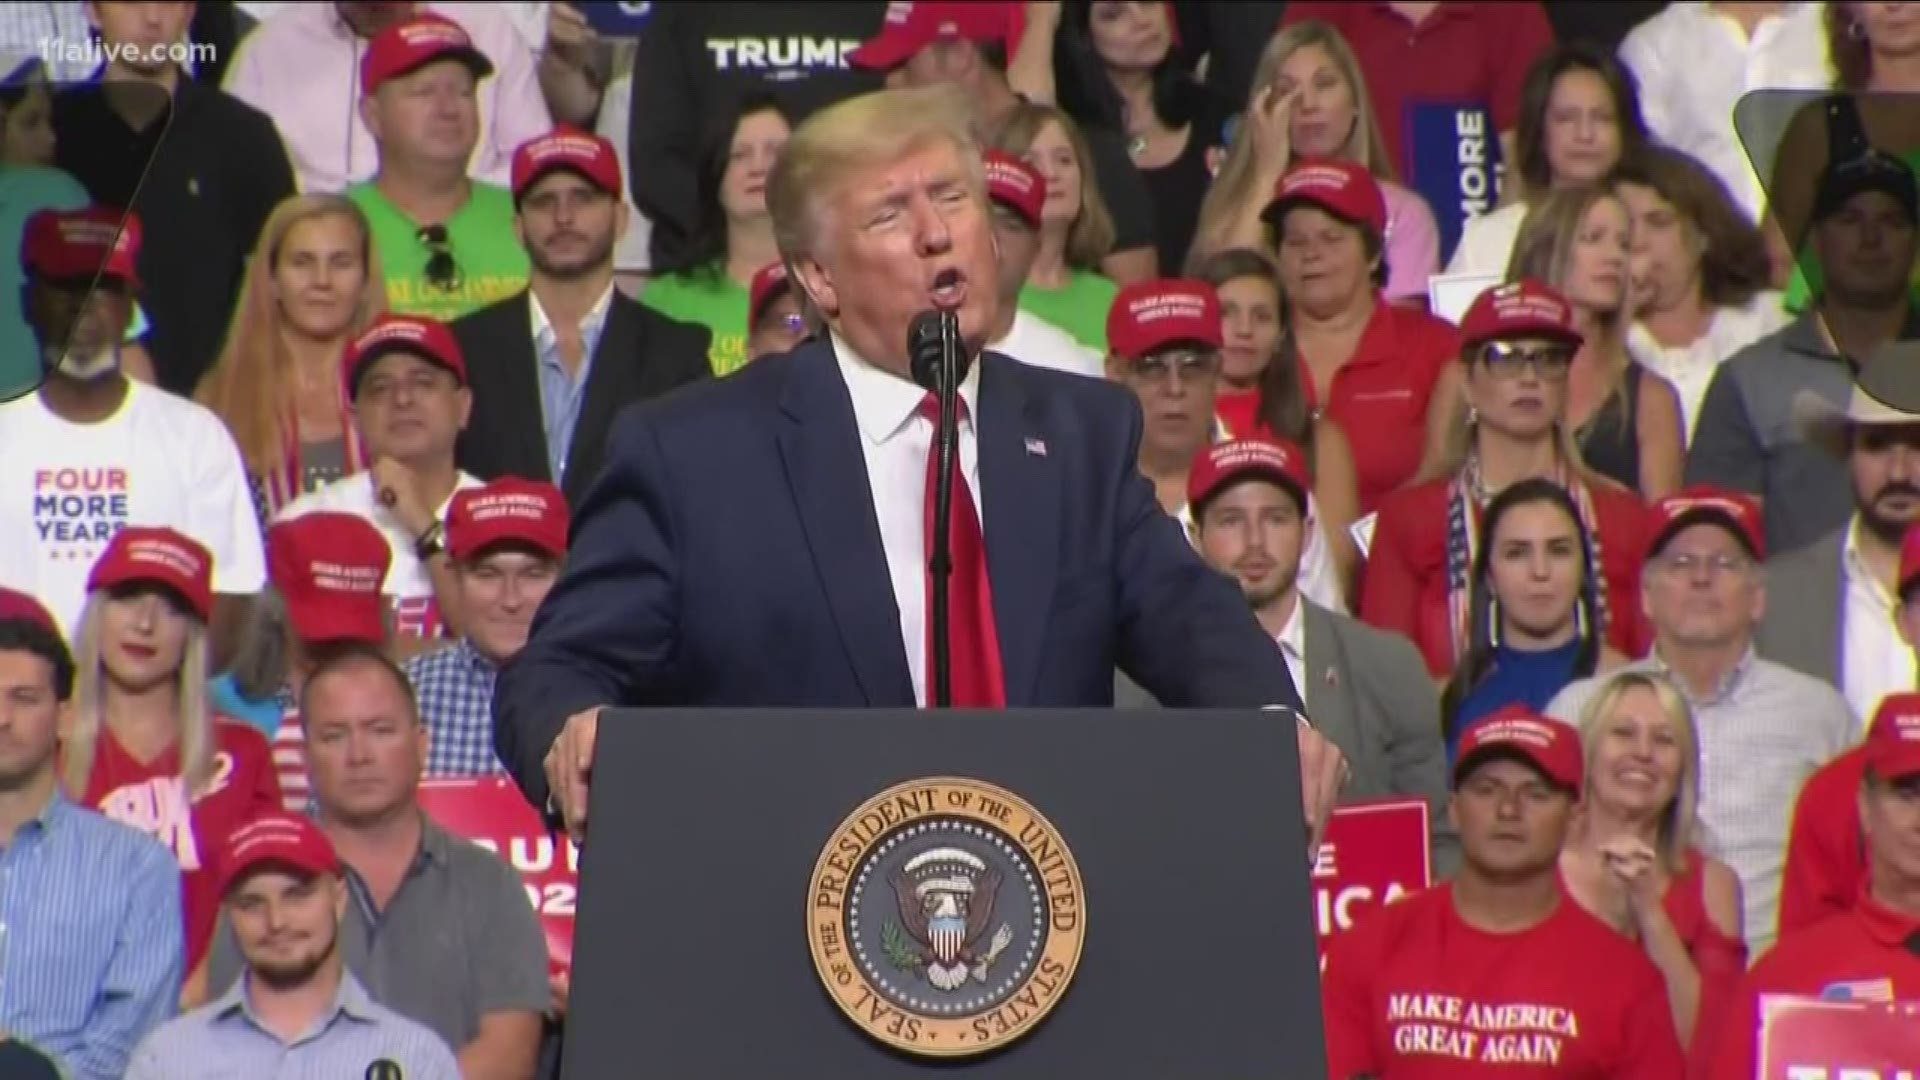 Addressing a crowd of thousands at Orlando's Amway Center, Trump complained he had been "under assault from the very first day" of his presidency.